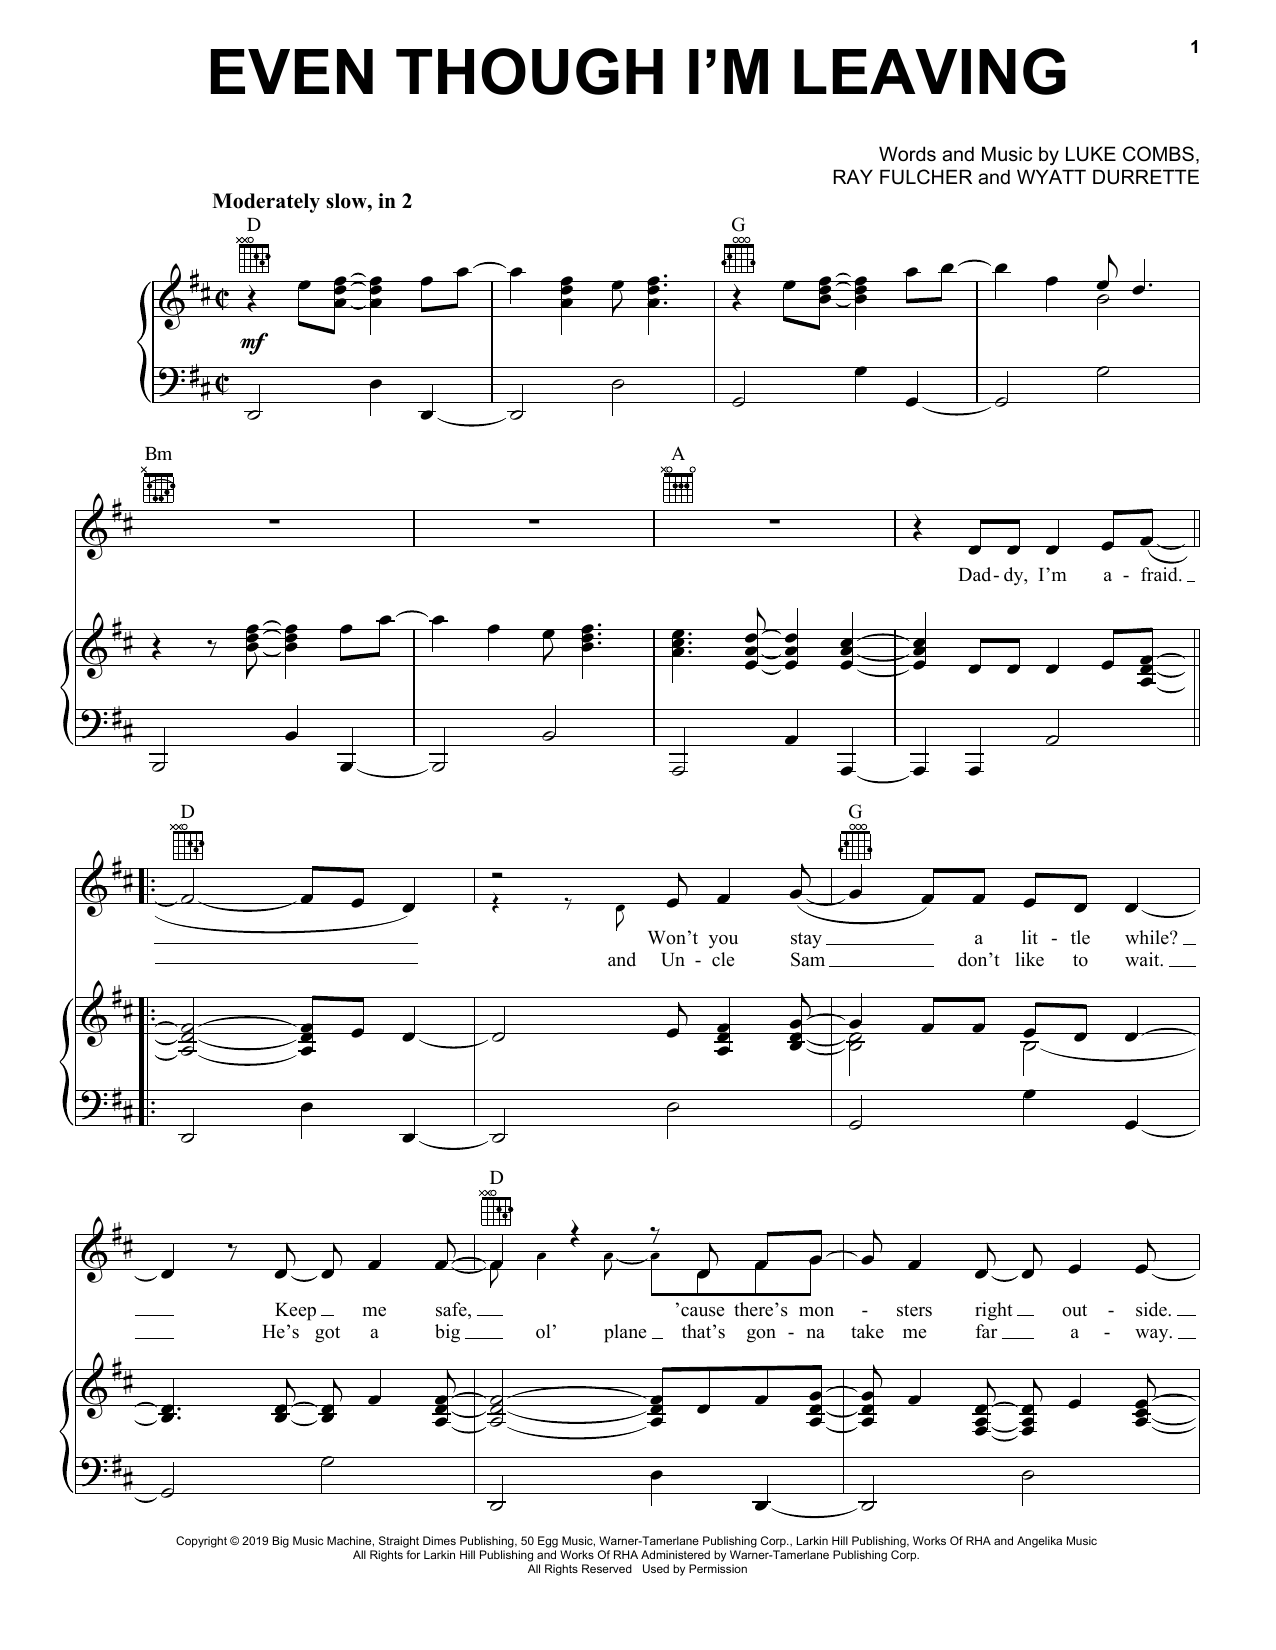 Download Luke Combs Even Though I'm Leaving Sheet Music